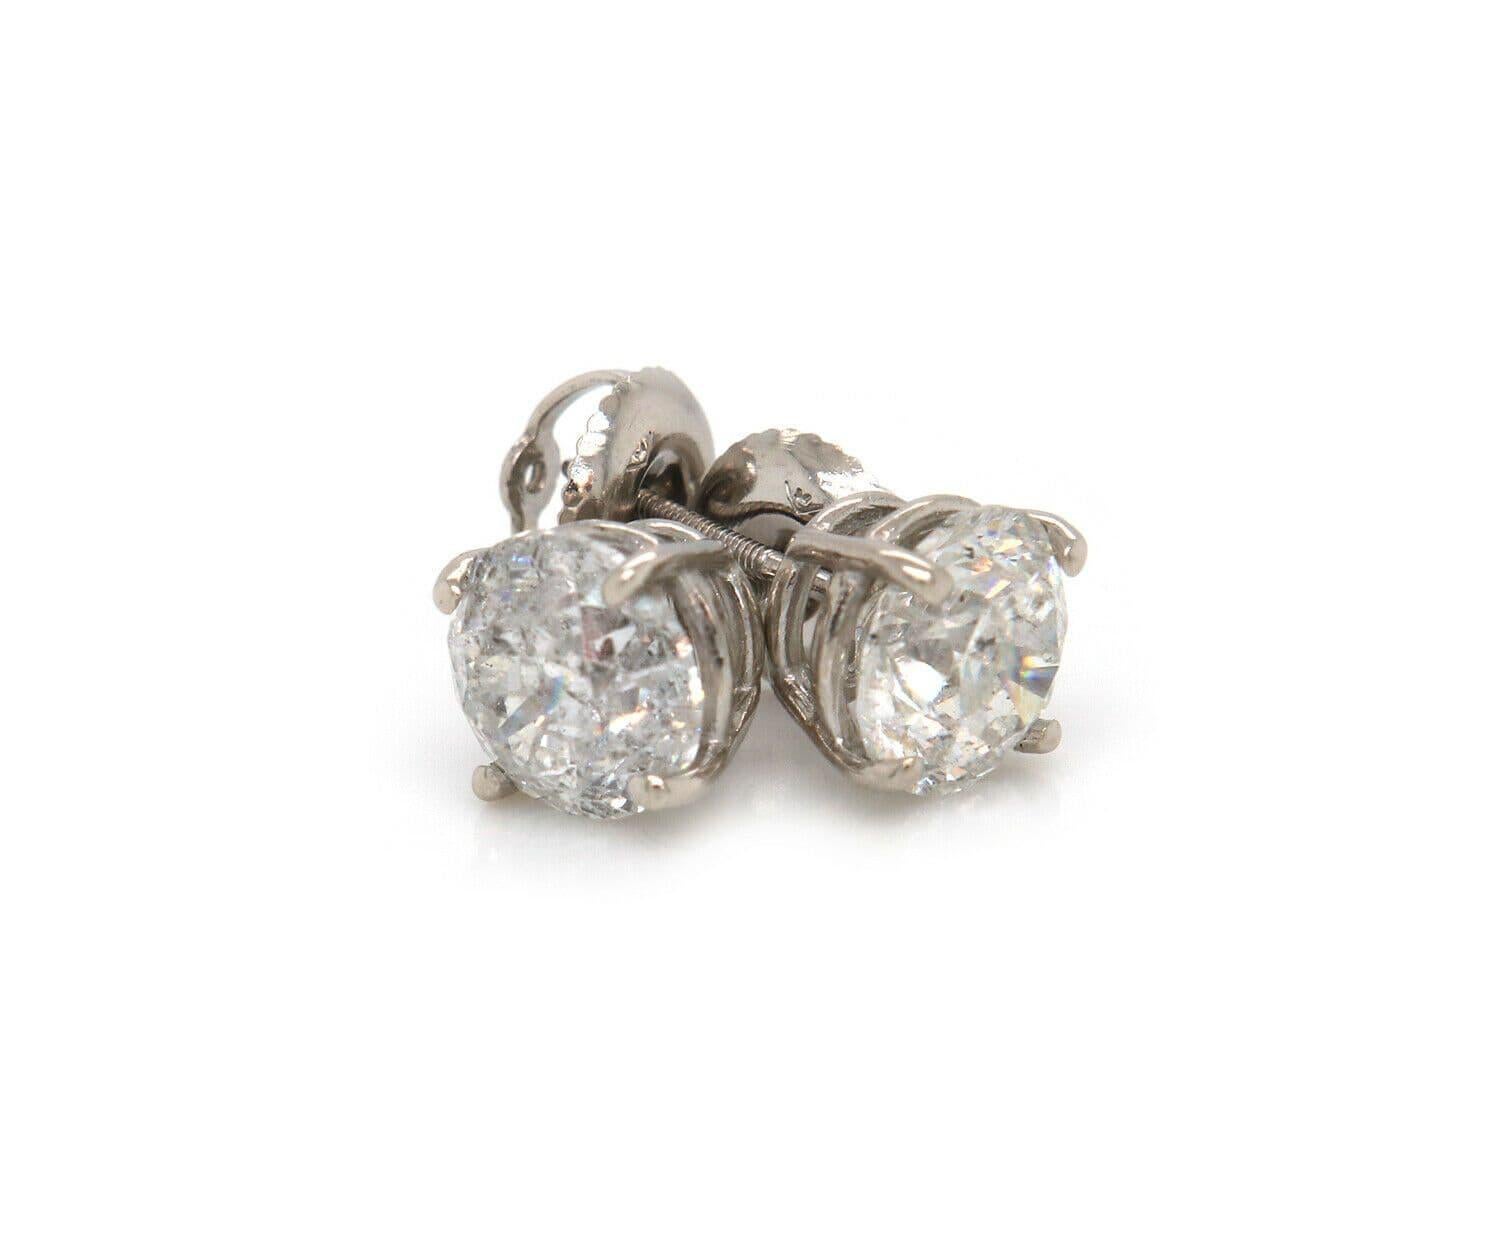 3.22ctw RBC Diamond Stud Earrings in 14K White Gold W/Cert In Excellent Condition For Sale In Vienna, VA